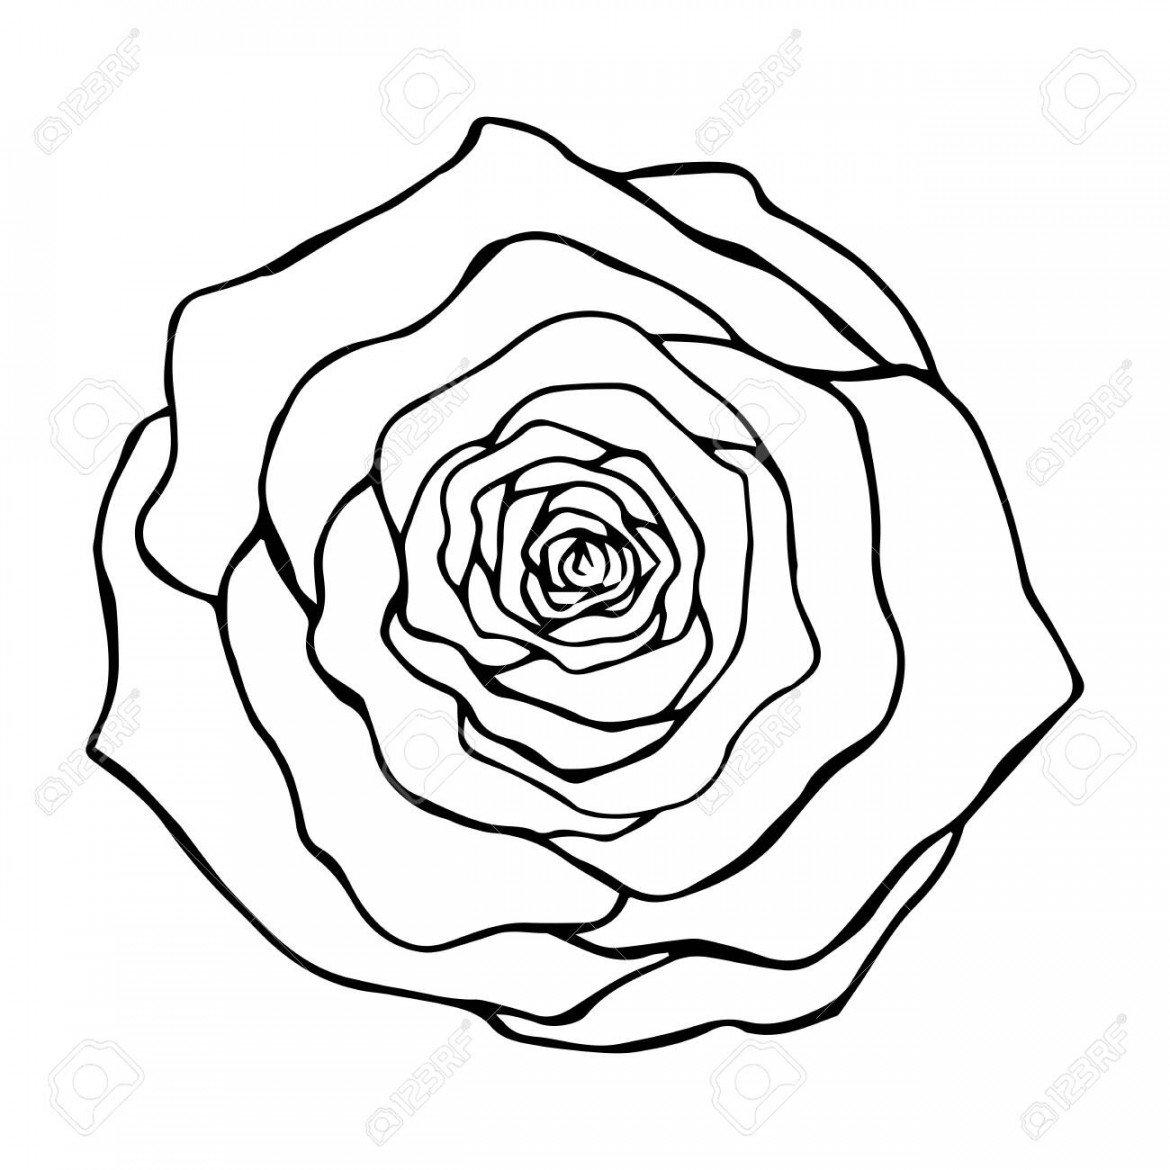 Rose Flower Top View Contour Drawing In Black On A White